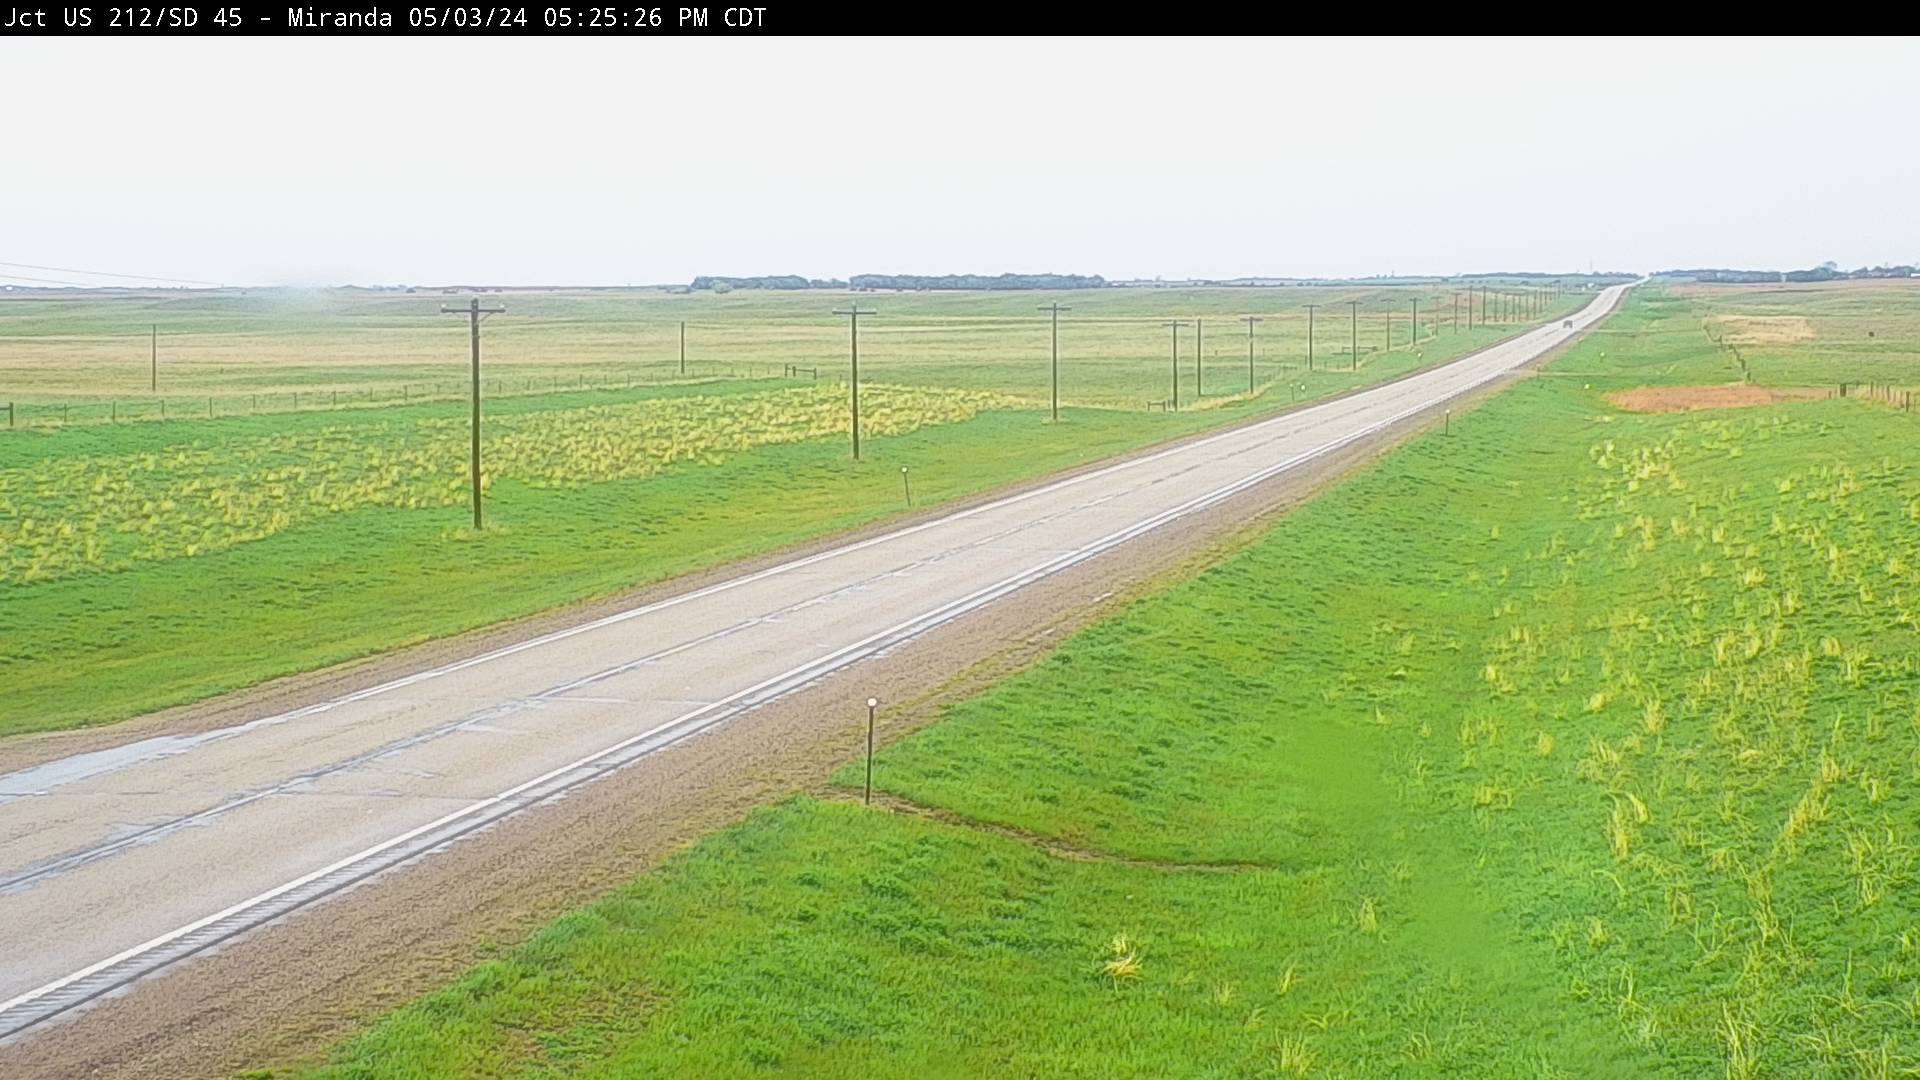 Traffic Cam 5 miles south of town at junction US-212 & SD-45 - East Player